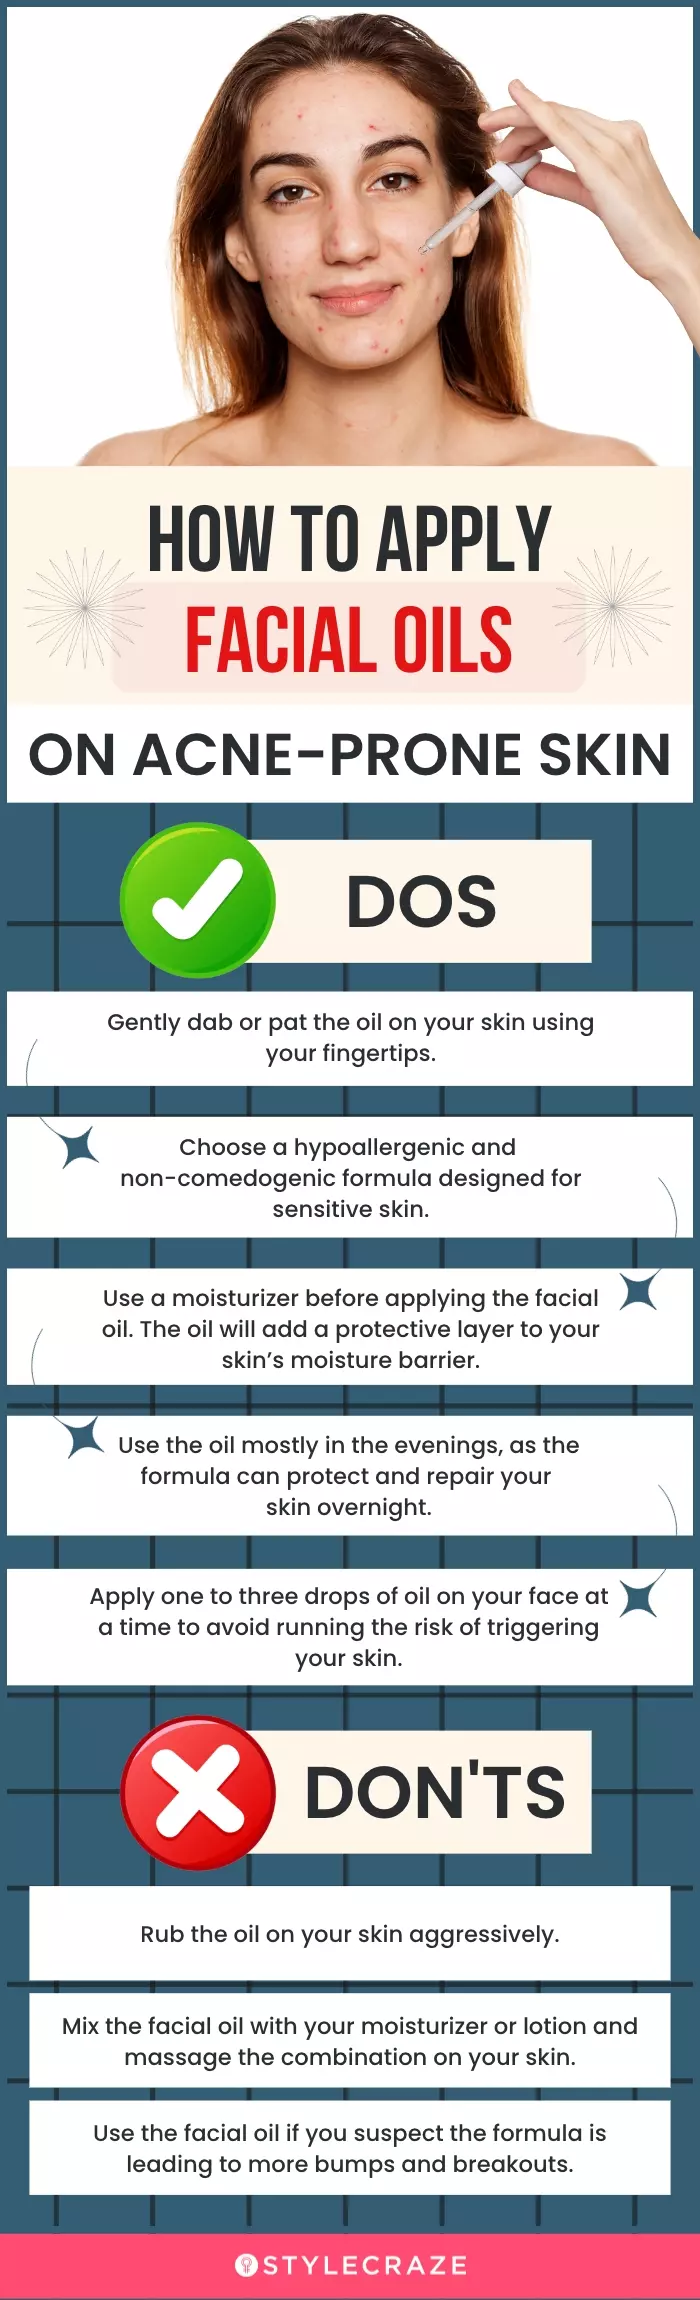 How To Apply Facial Oils On Acne-Prone Skin (infographic)